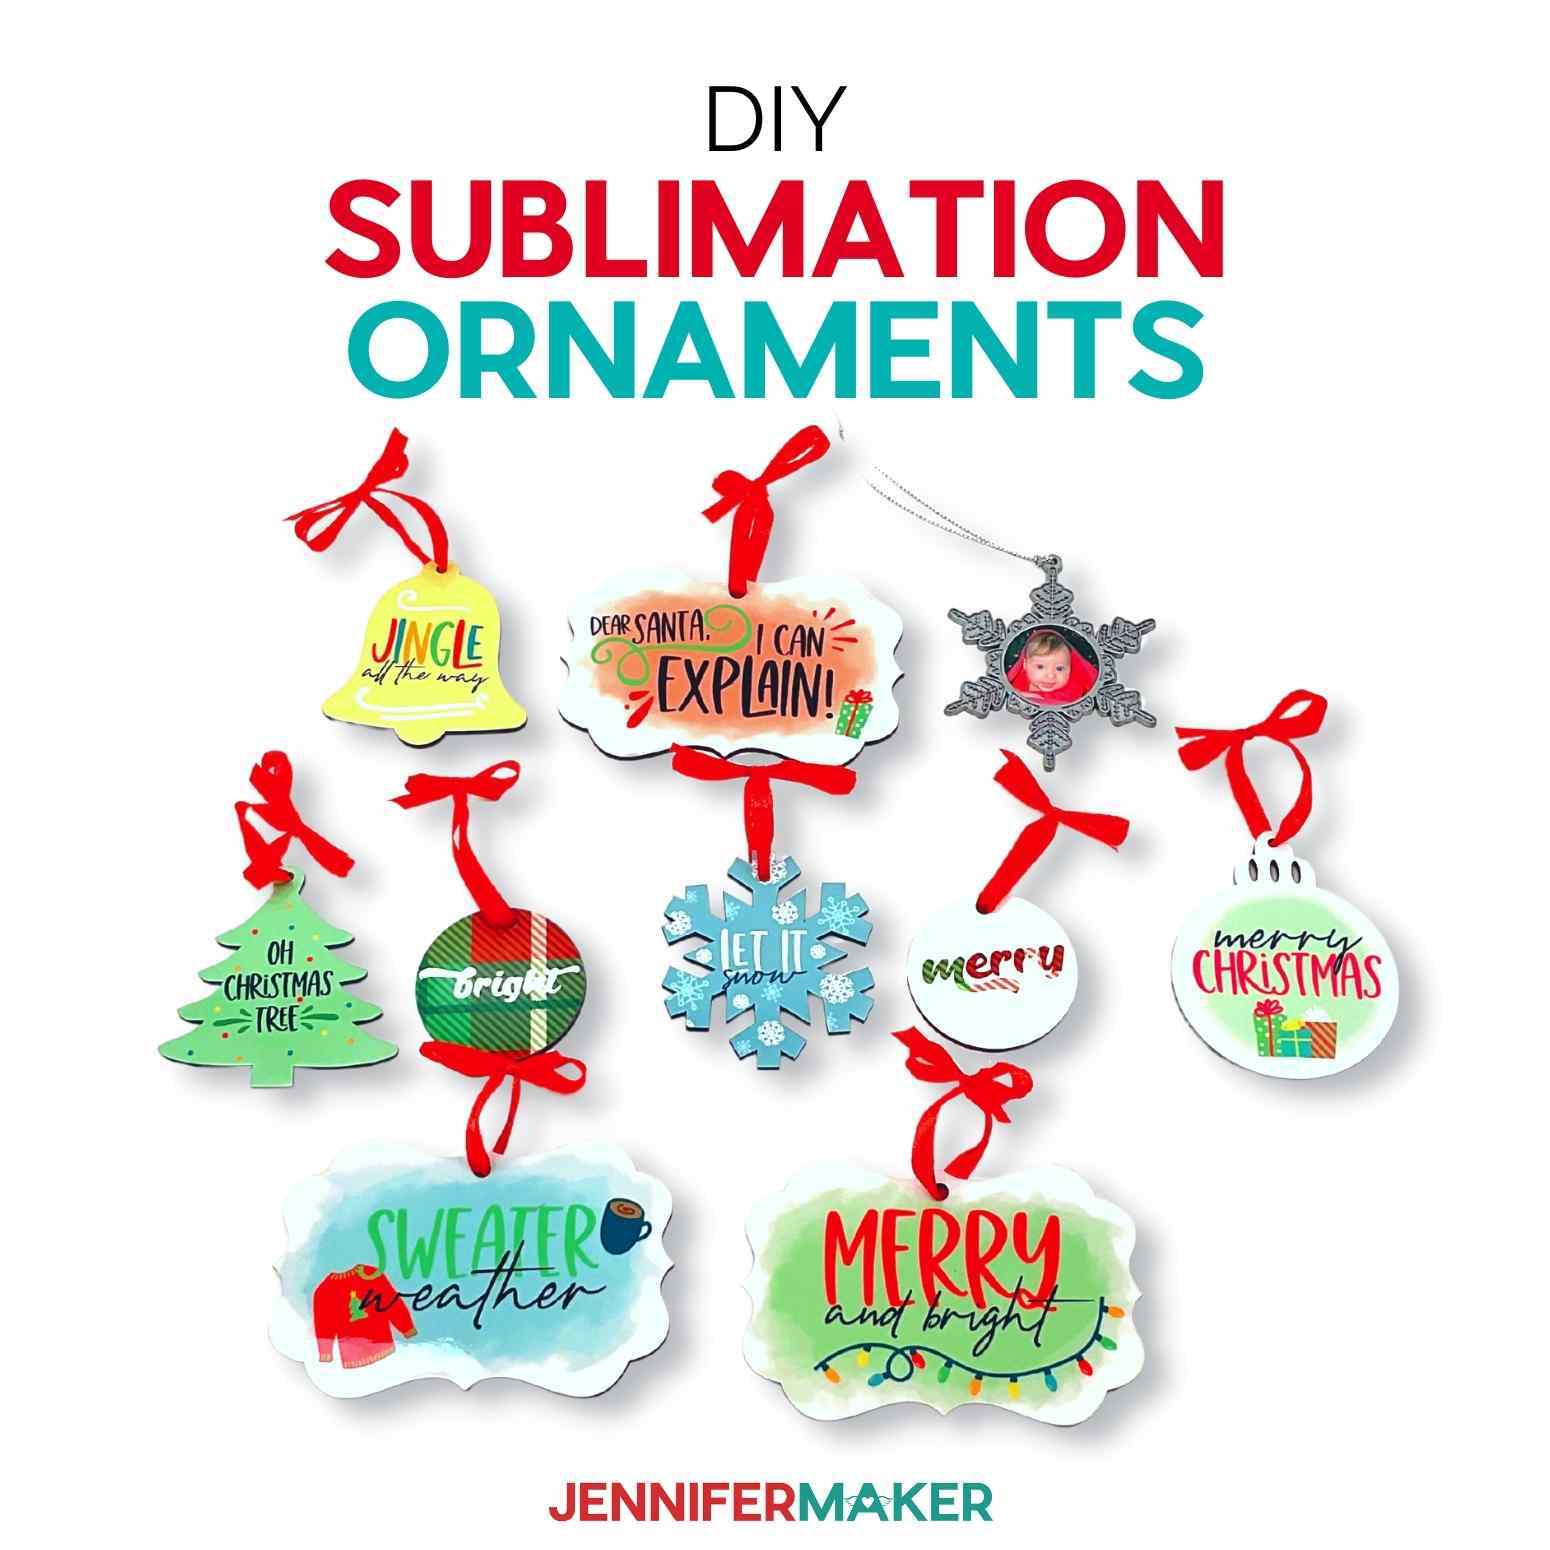 DIY sublimation ornaments with different designs